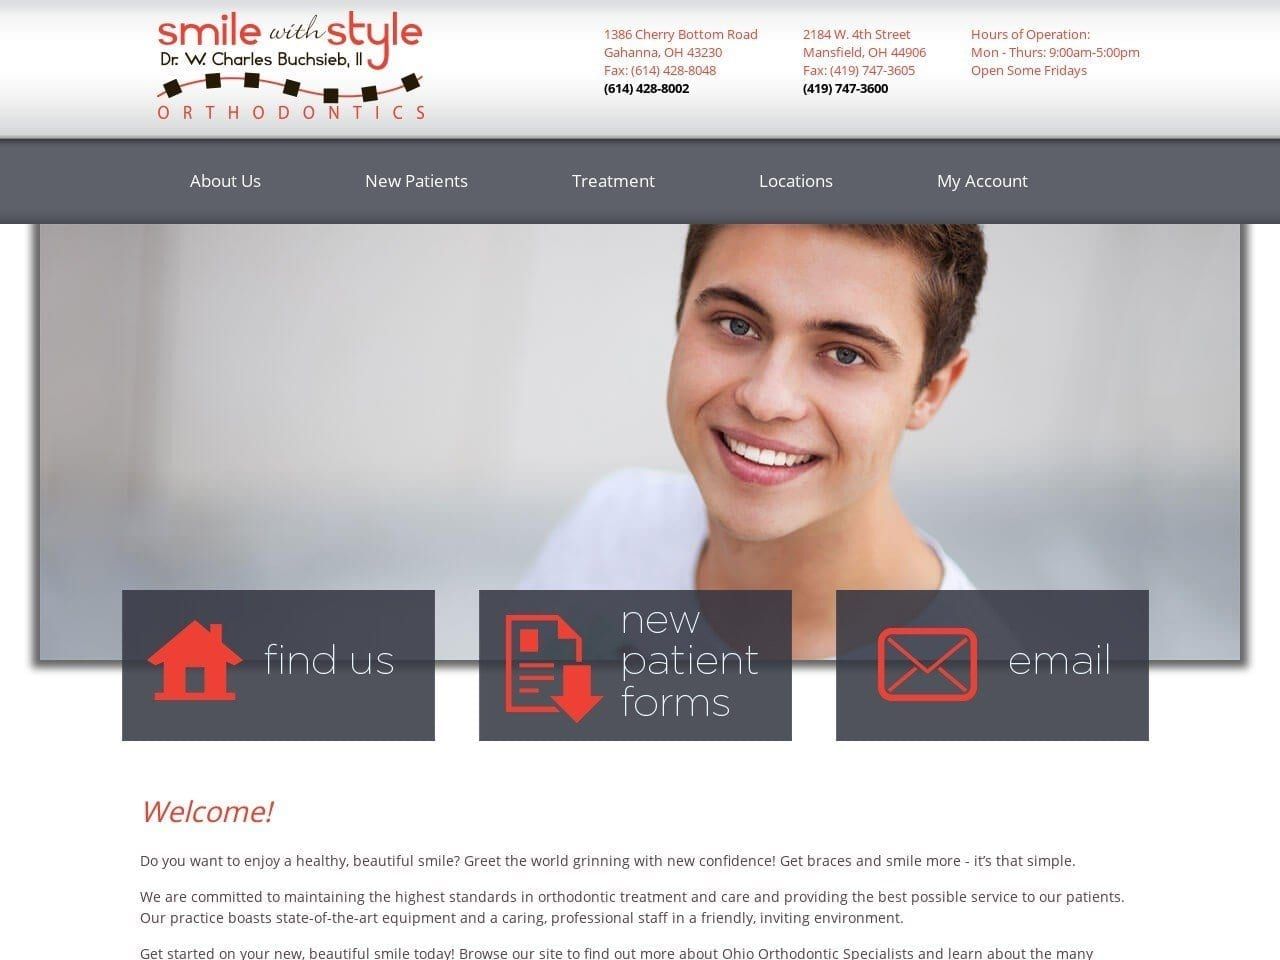 Oh Orthodontic Specialists Website Screenshot from ohio4smiles.com